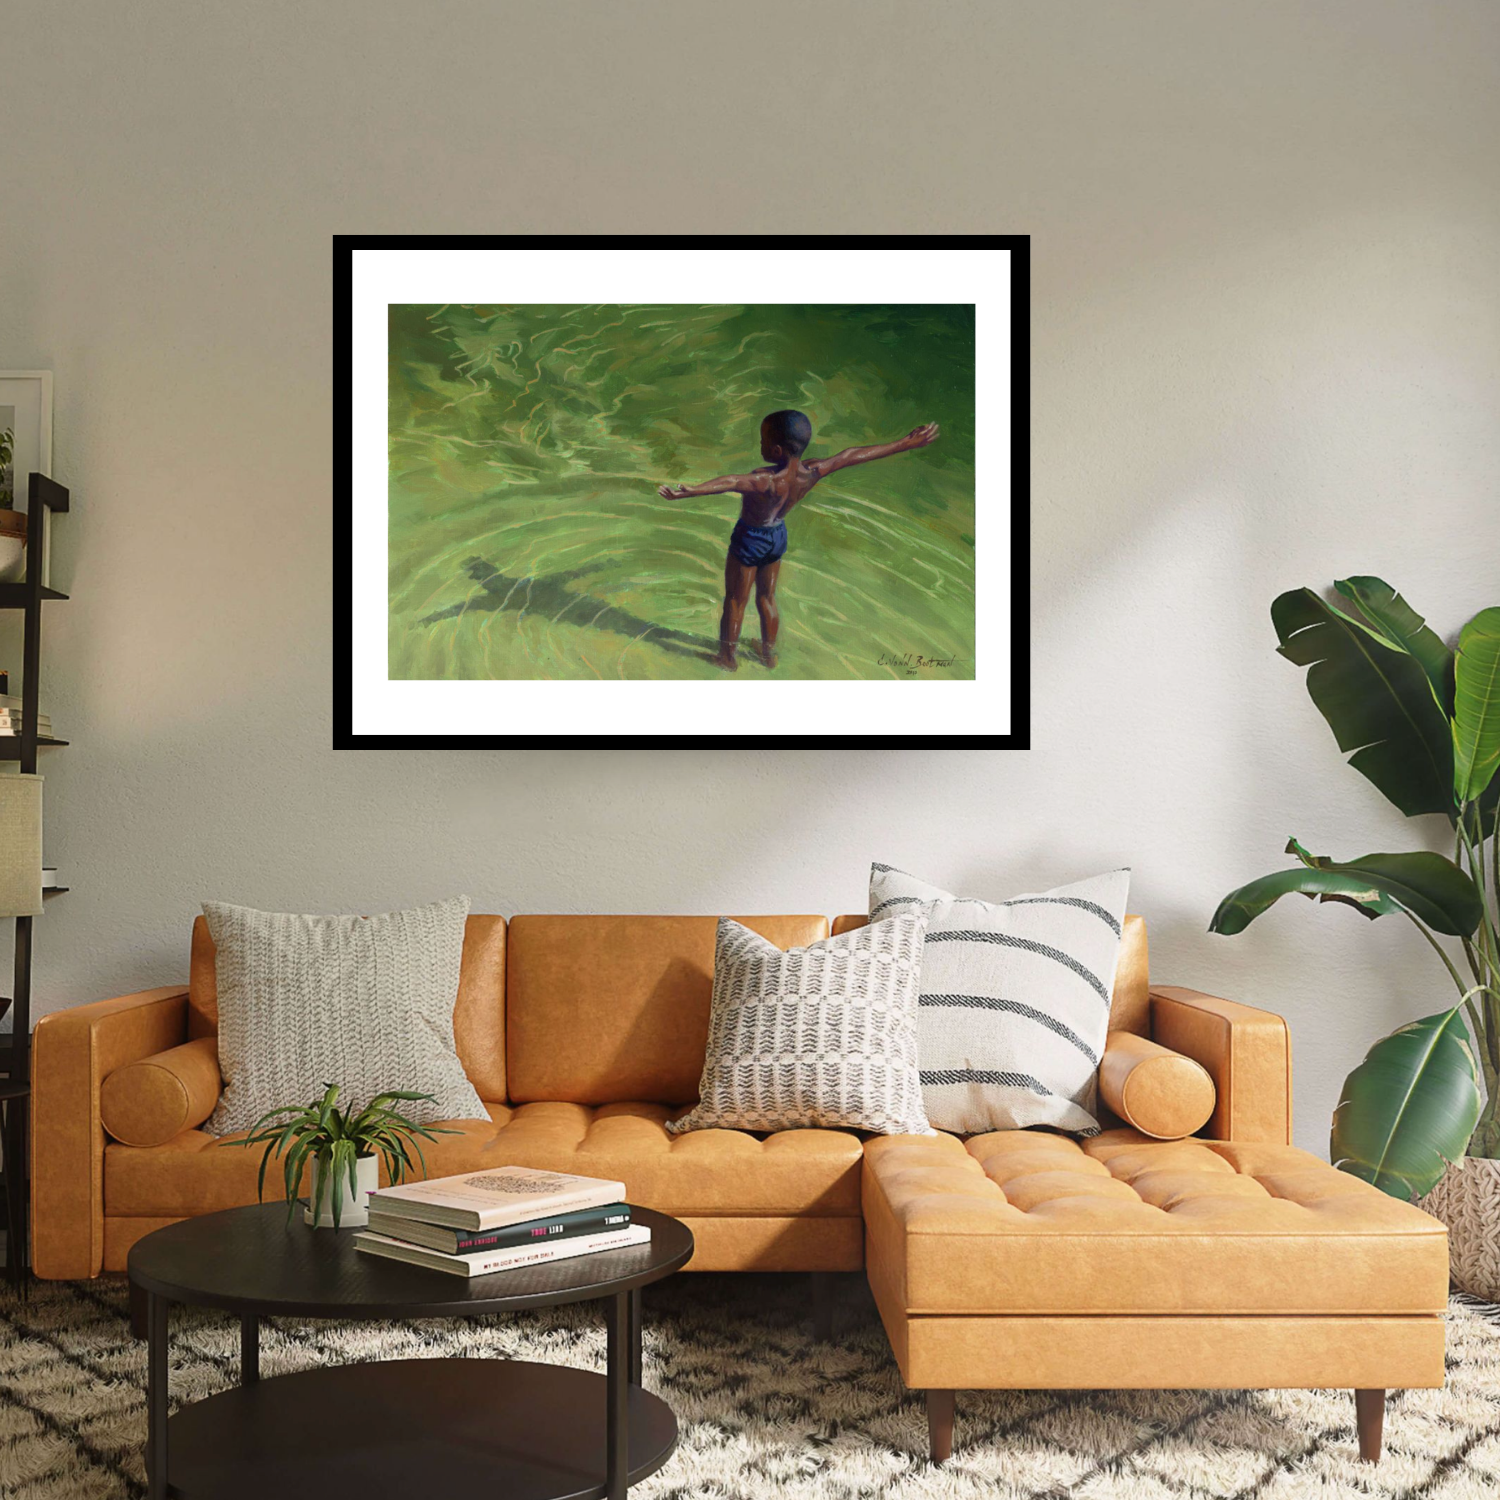 Set in an elegant interior the black framed print ‘Me’ by Colin Bootman is a vibrant contemporary landscape where a boy wearing a swimming suit is seen from above, standing with open arms in a bright green river water 